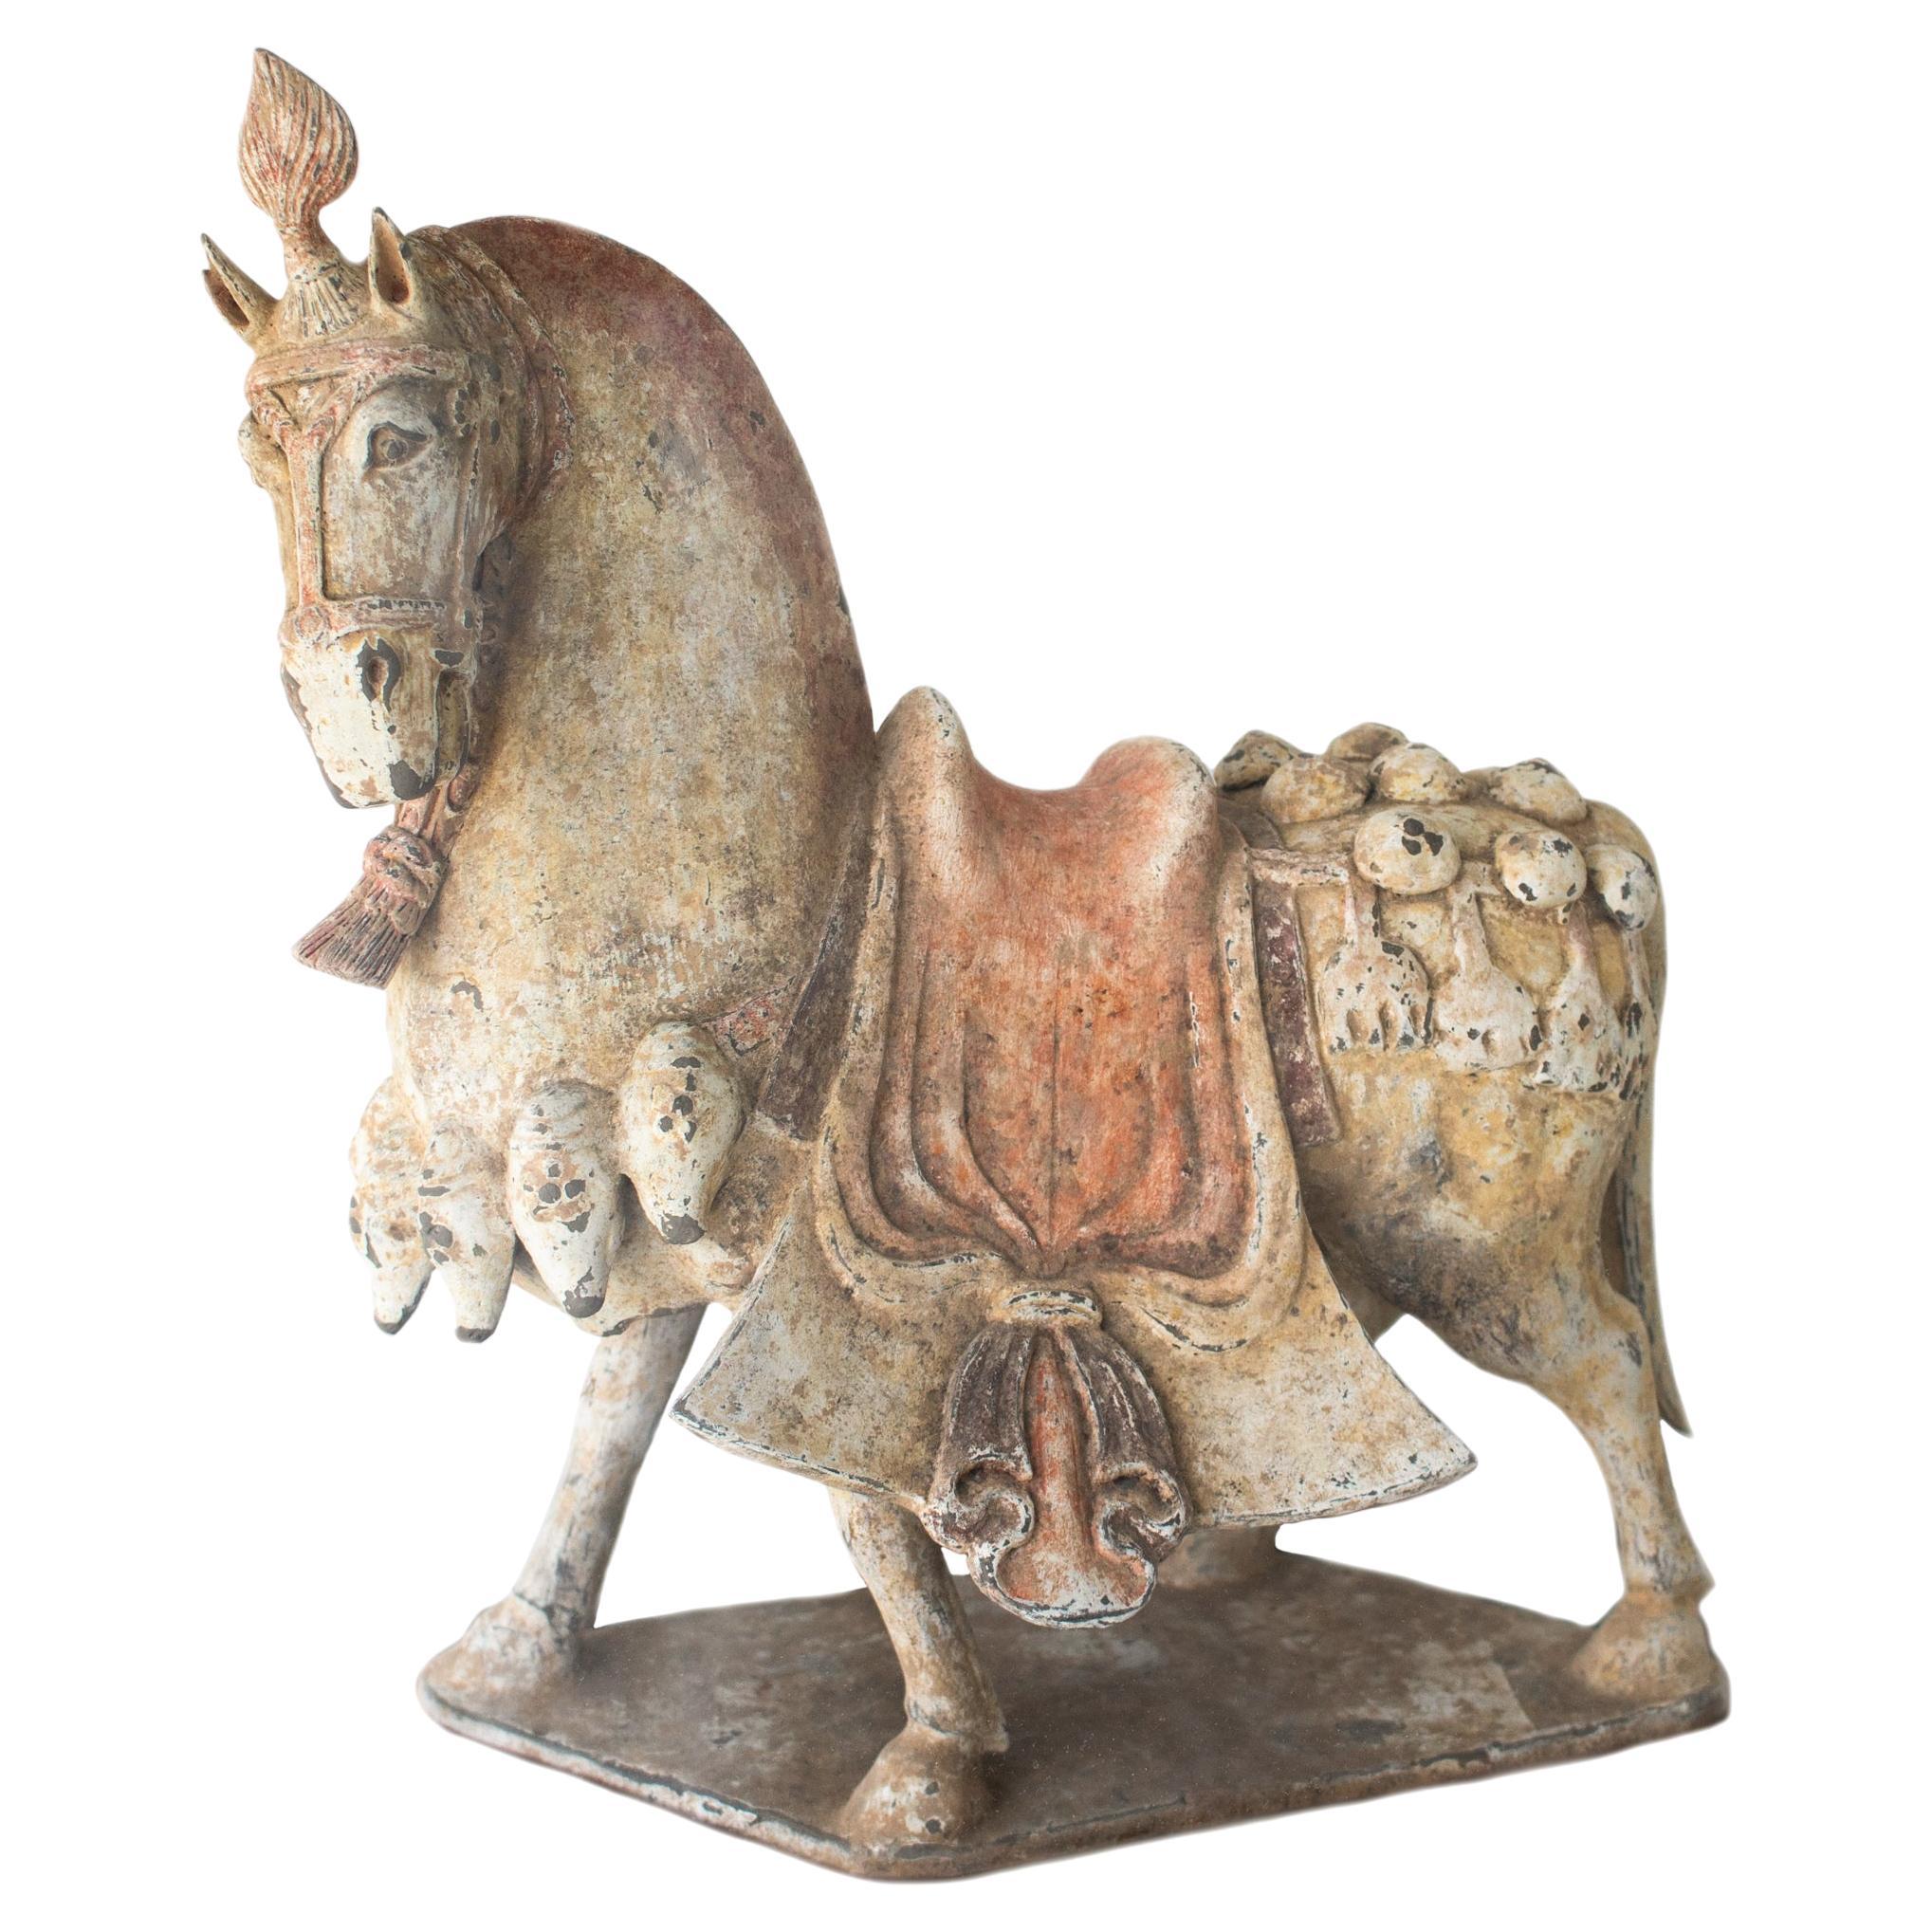 China 549-577 AD Northern Qi Dynasty Ancient Caparisoned Horse In Earthenware